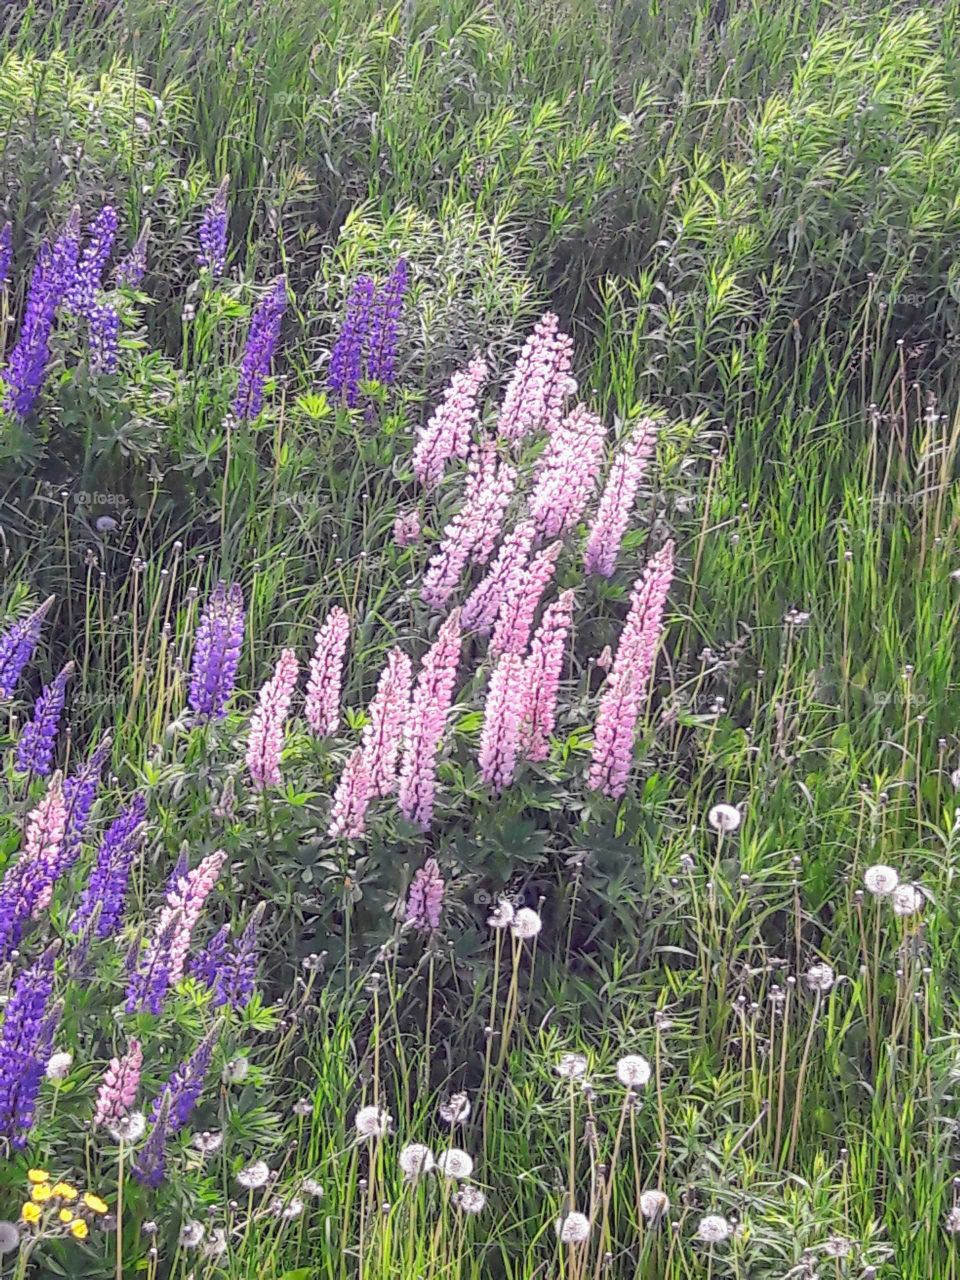 Lupines in bloom!